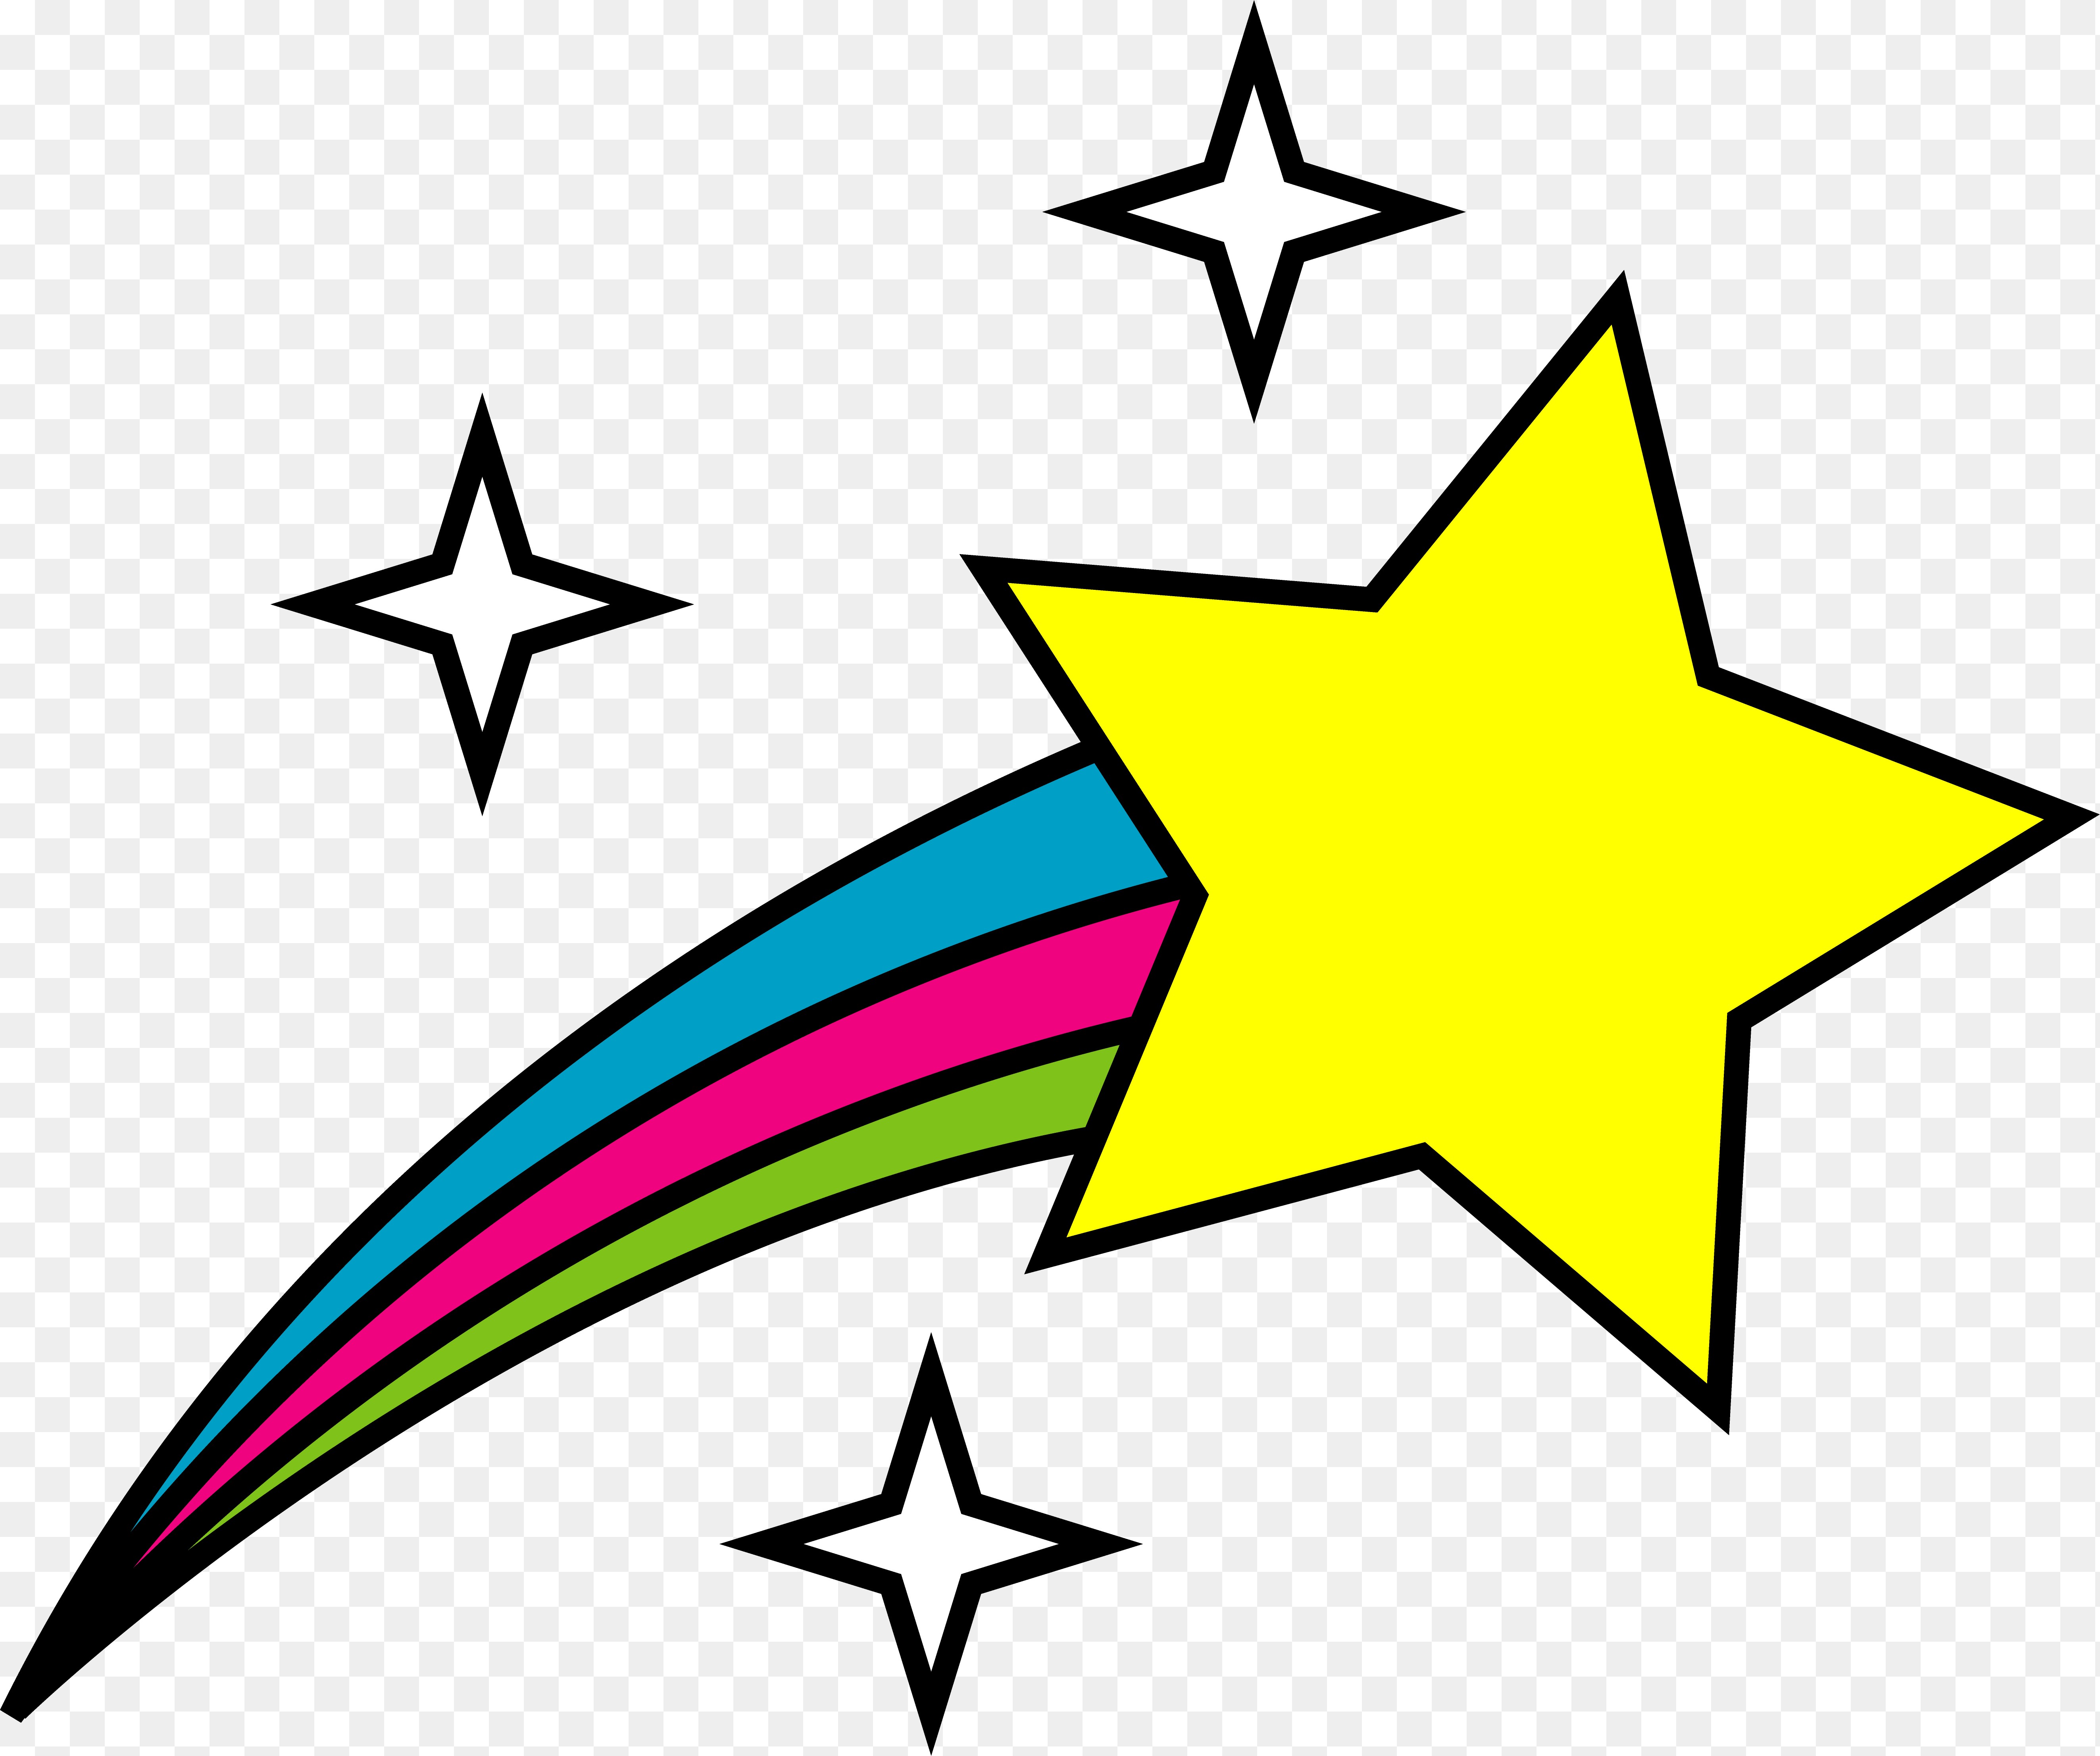 Star clip art free clipart image